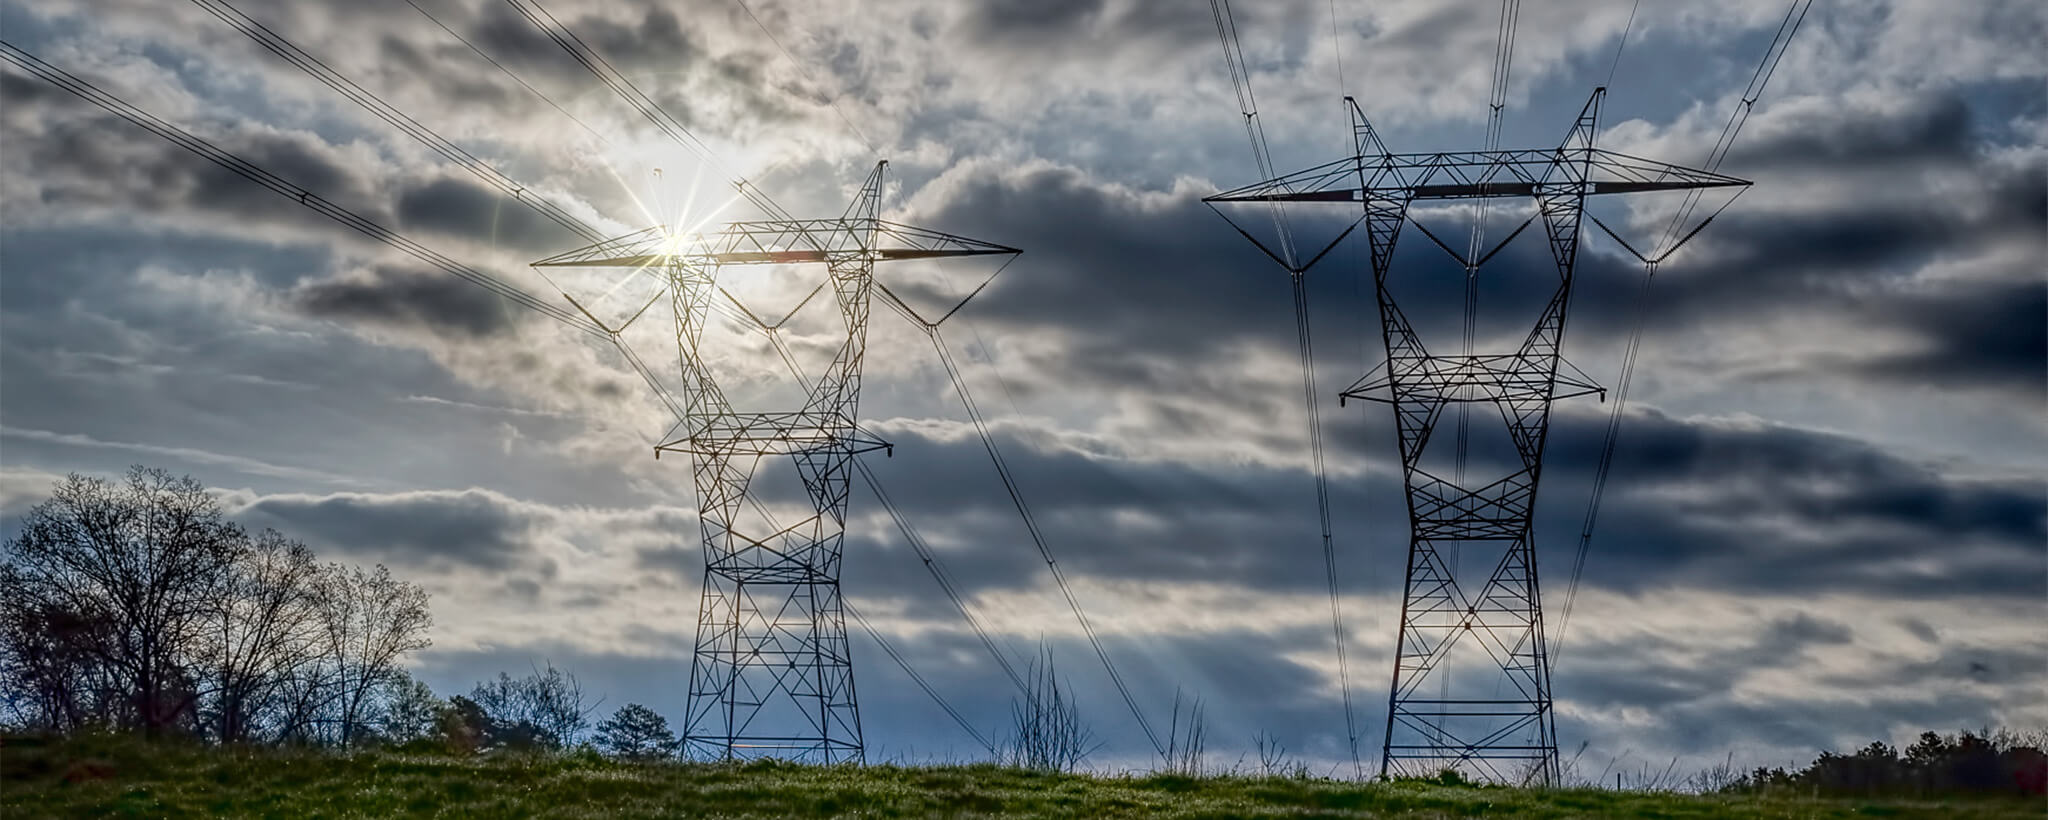 A pair of electrical power line towers with the sun shining in the background